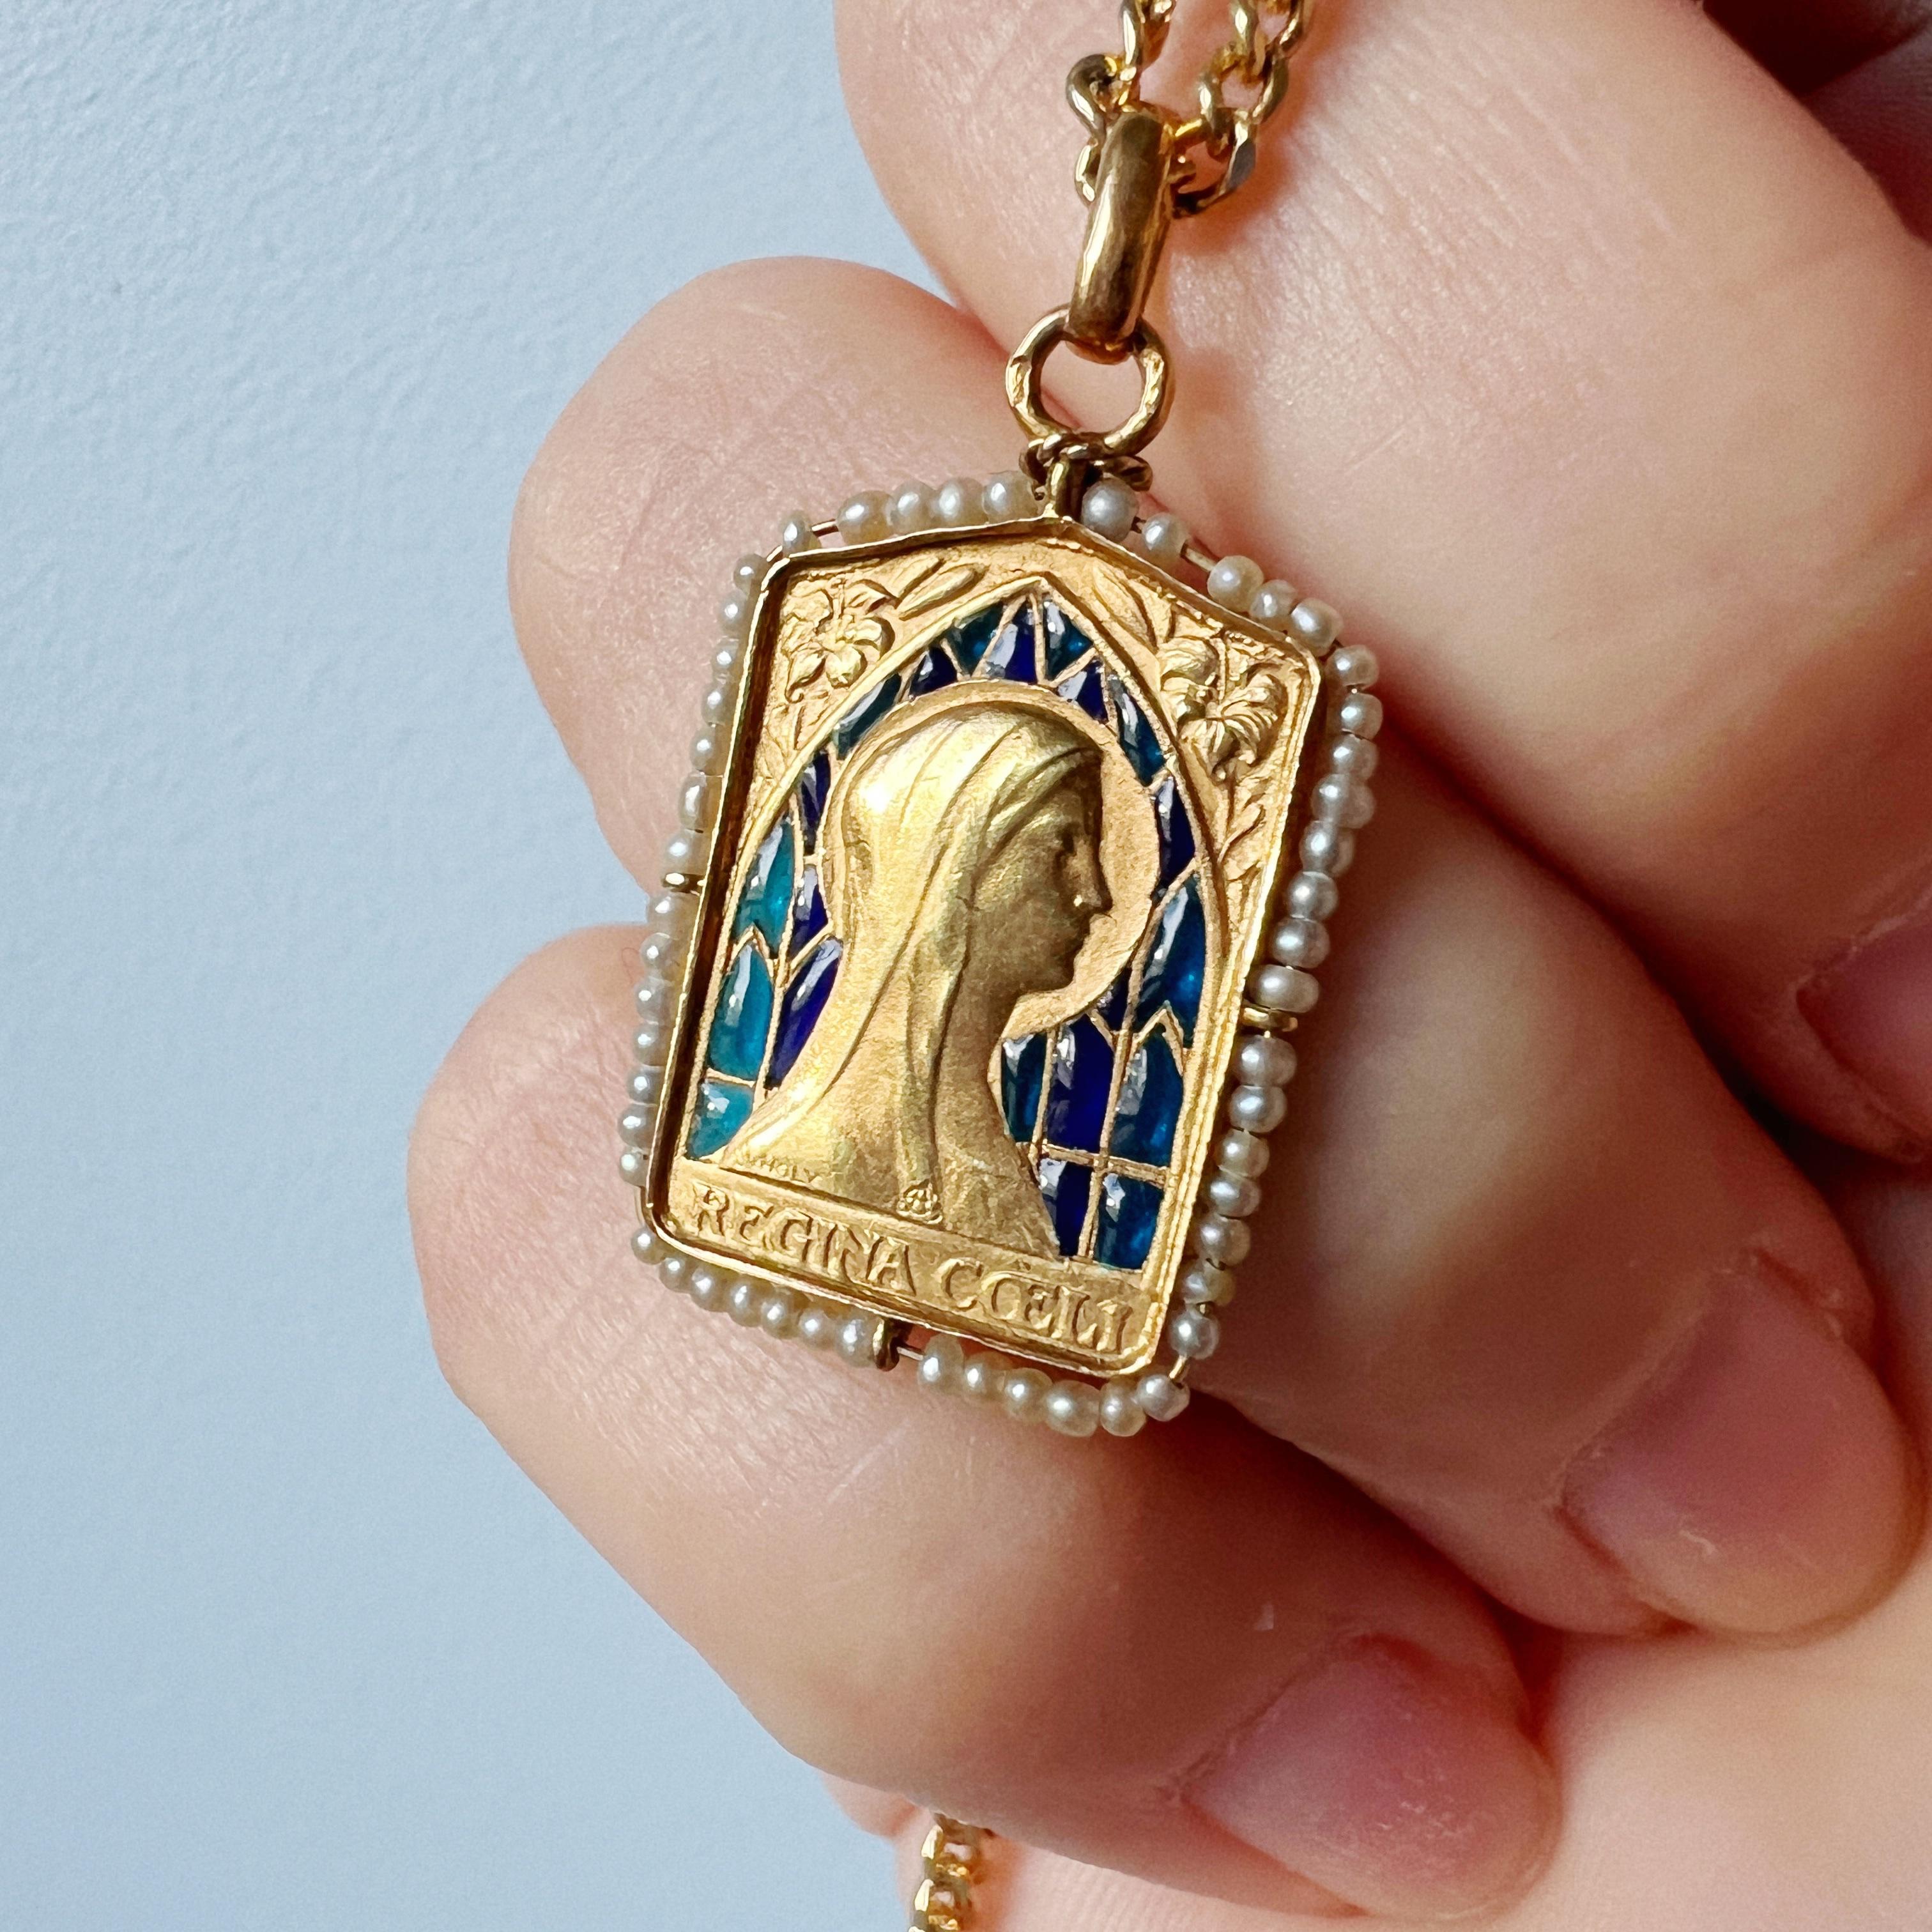 For sale an antique 18K gold medal featuring Mary, backed on a beautiful plique à jour enamel.

The plique à jour enamel adorning the medal showcases a captivating play of deep and light, two-toned blue hues. This delicate enamel is meticulously